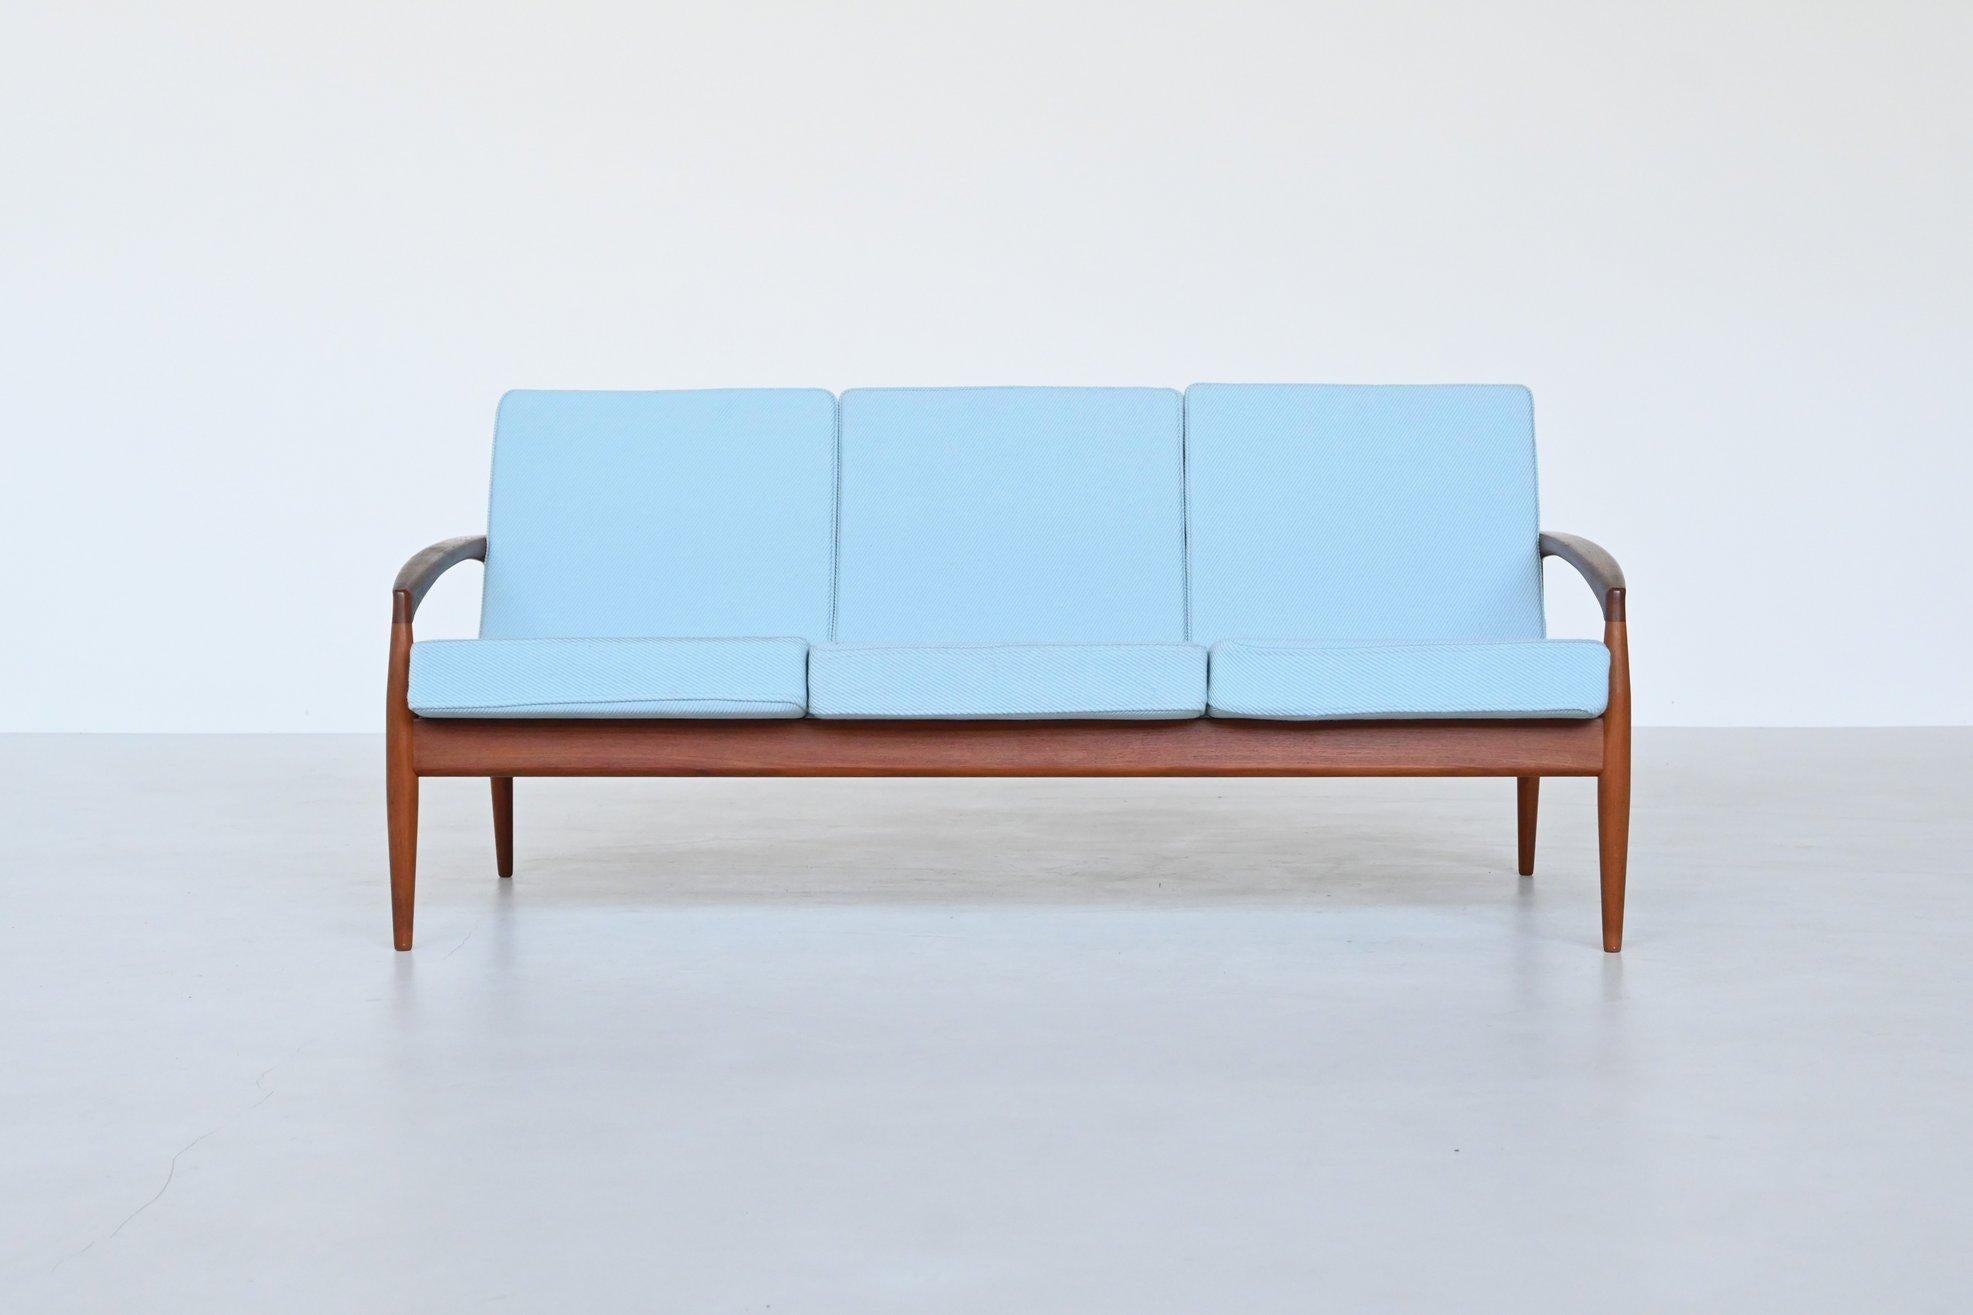 Beautiful elegant shaped three-seat sofa model Paper Knife no. 121 designed by Kai Kristiansen and manufactured by Magnus Olesen, Denmark 1956. This sculpted sofa features a solid teak wooden frame and the cushions are upholstered with high-quality